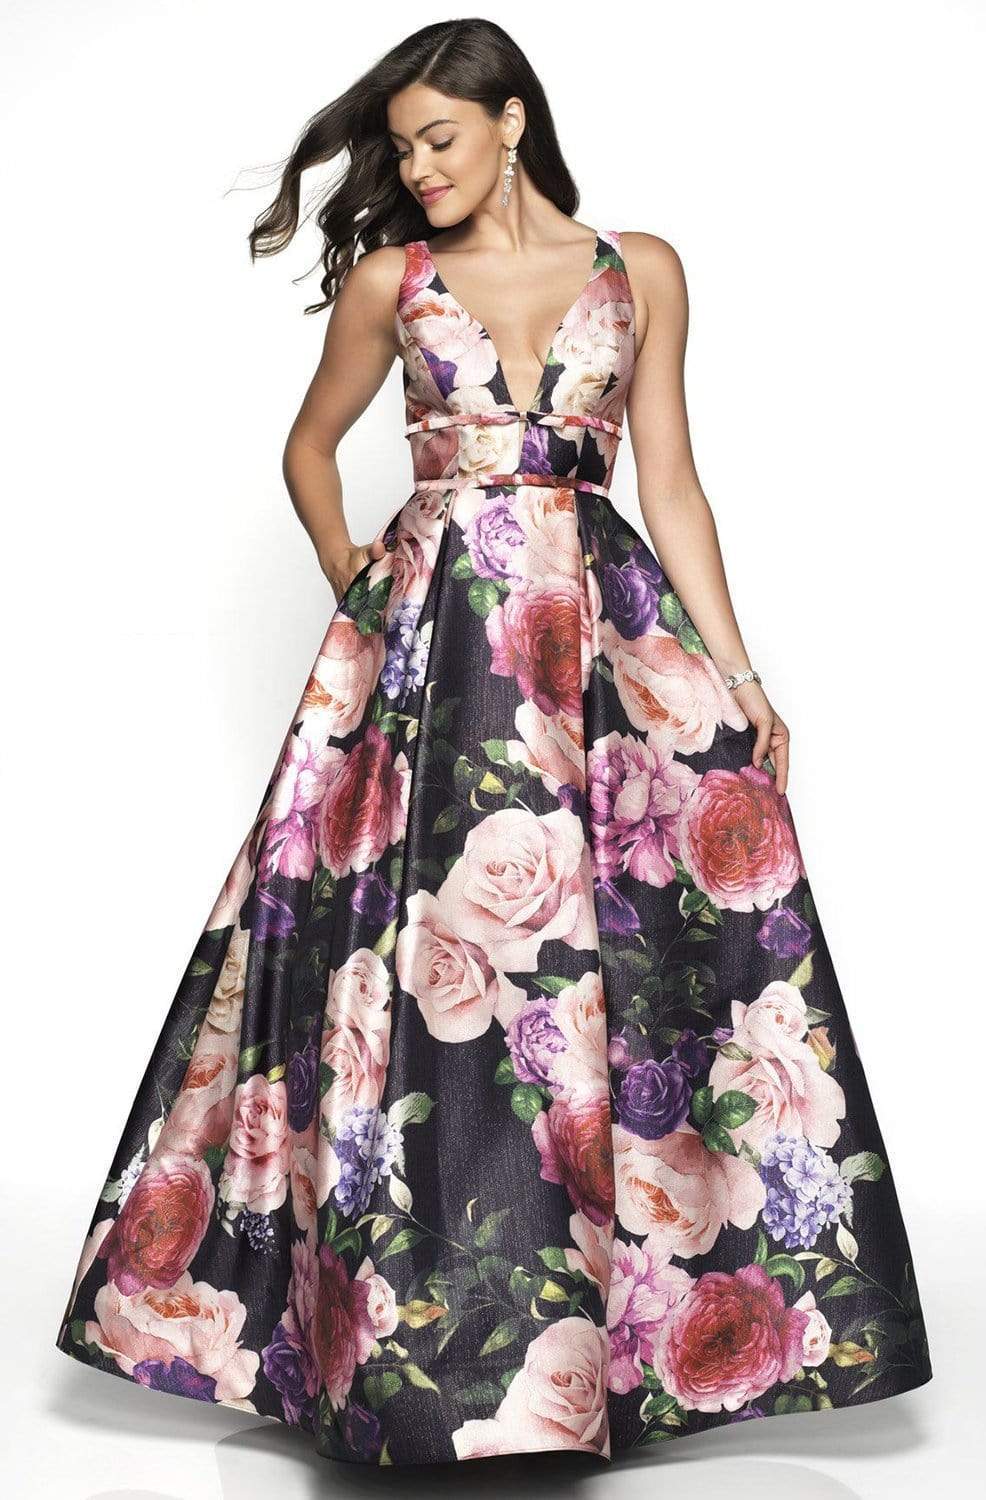 Blush by Alexia Designs - 11735 Plunging Floral Print Ballgown Special Occasion Dress 0 / Black/Floral Print